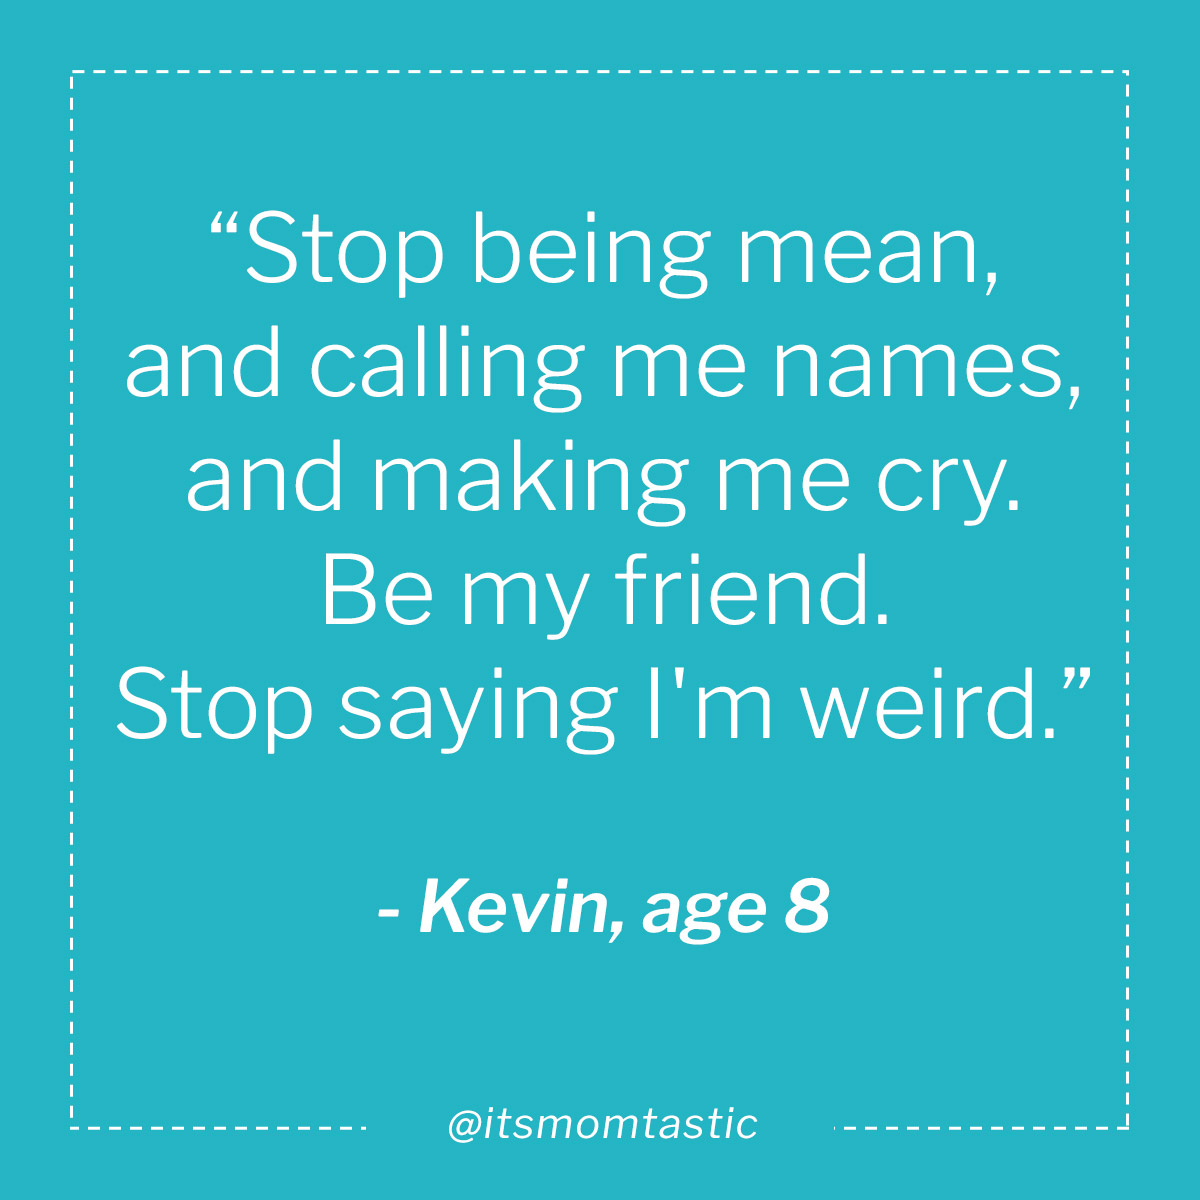 Kevin, age 8